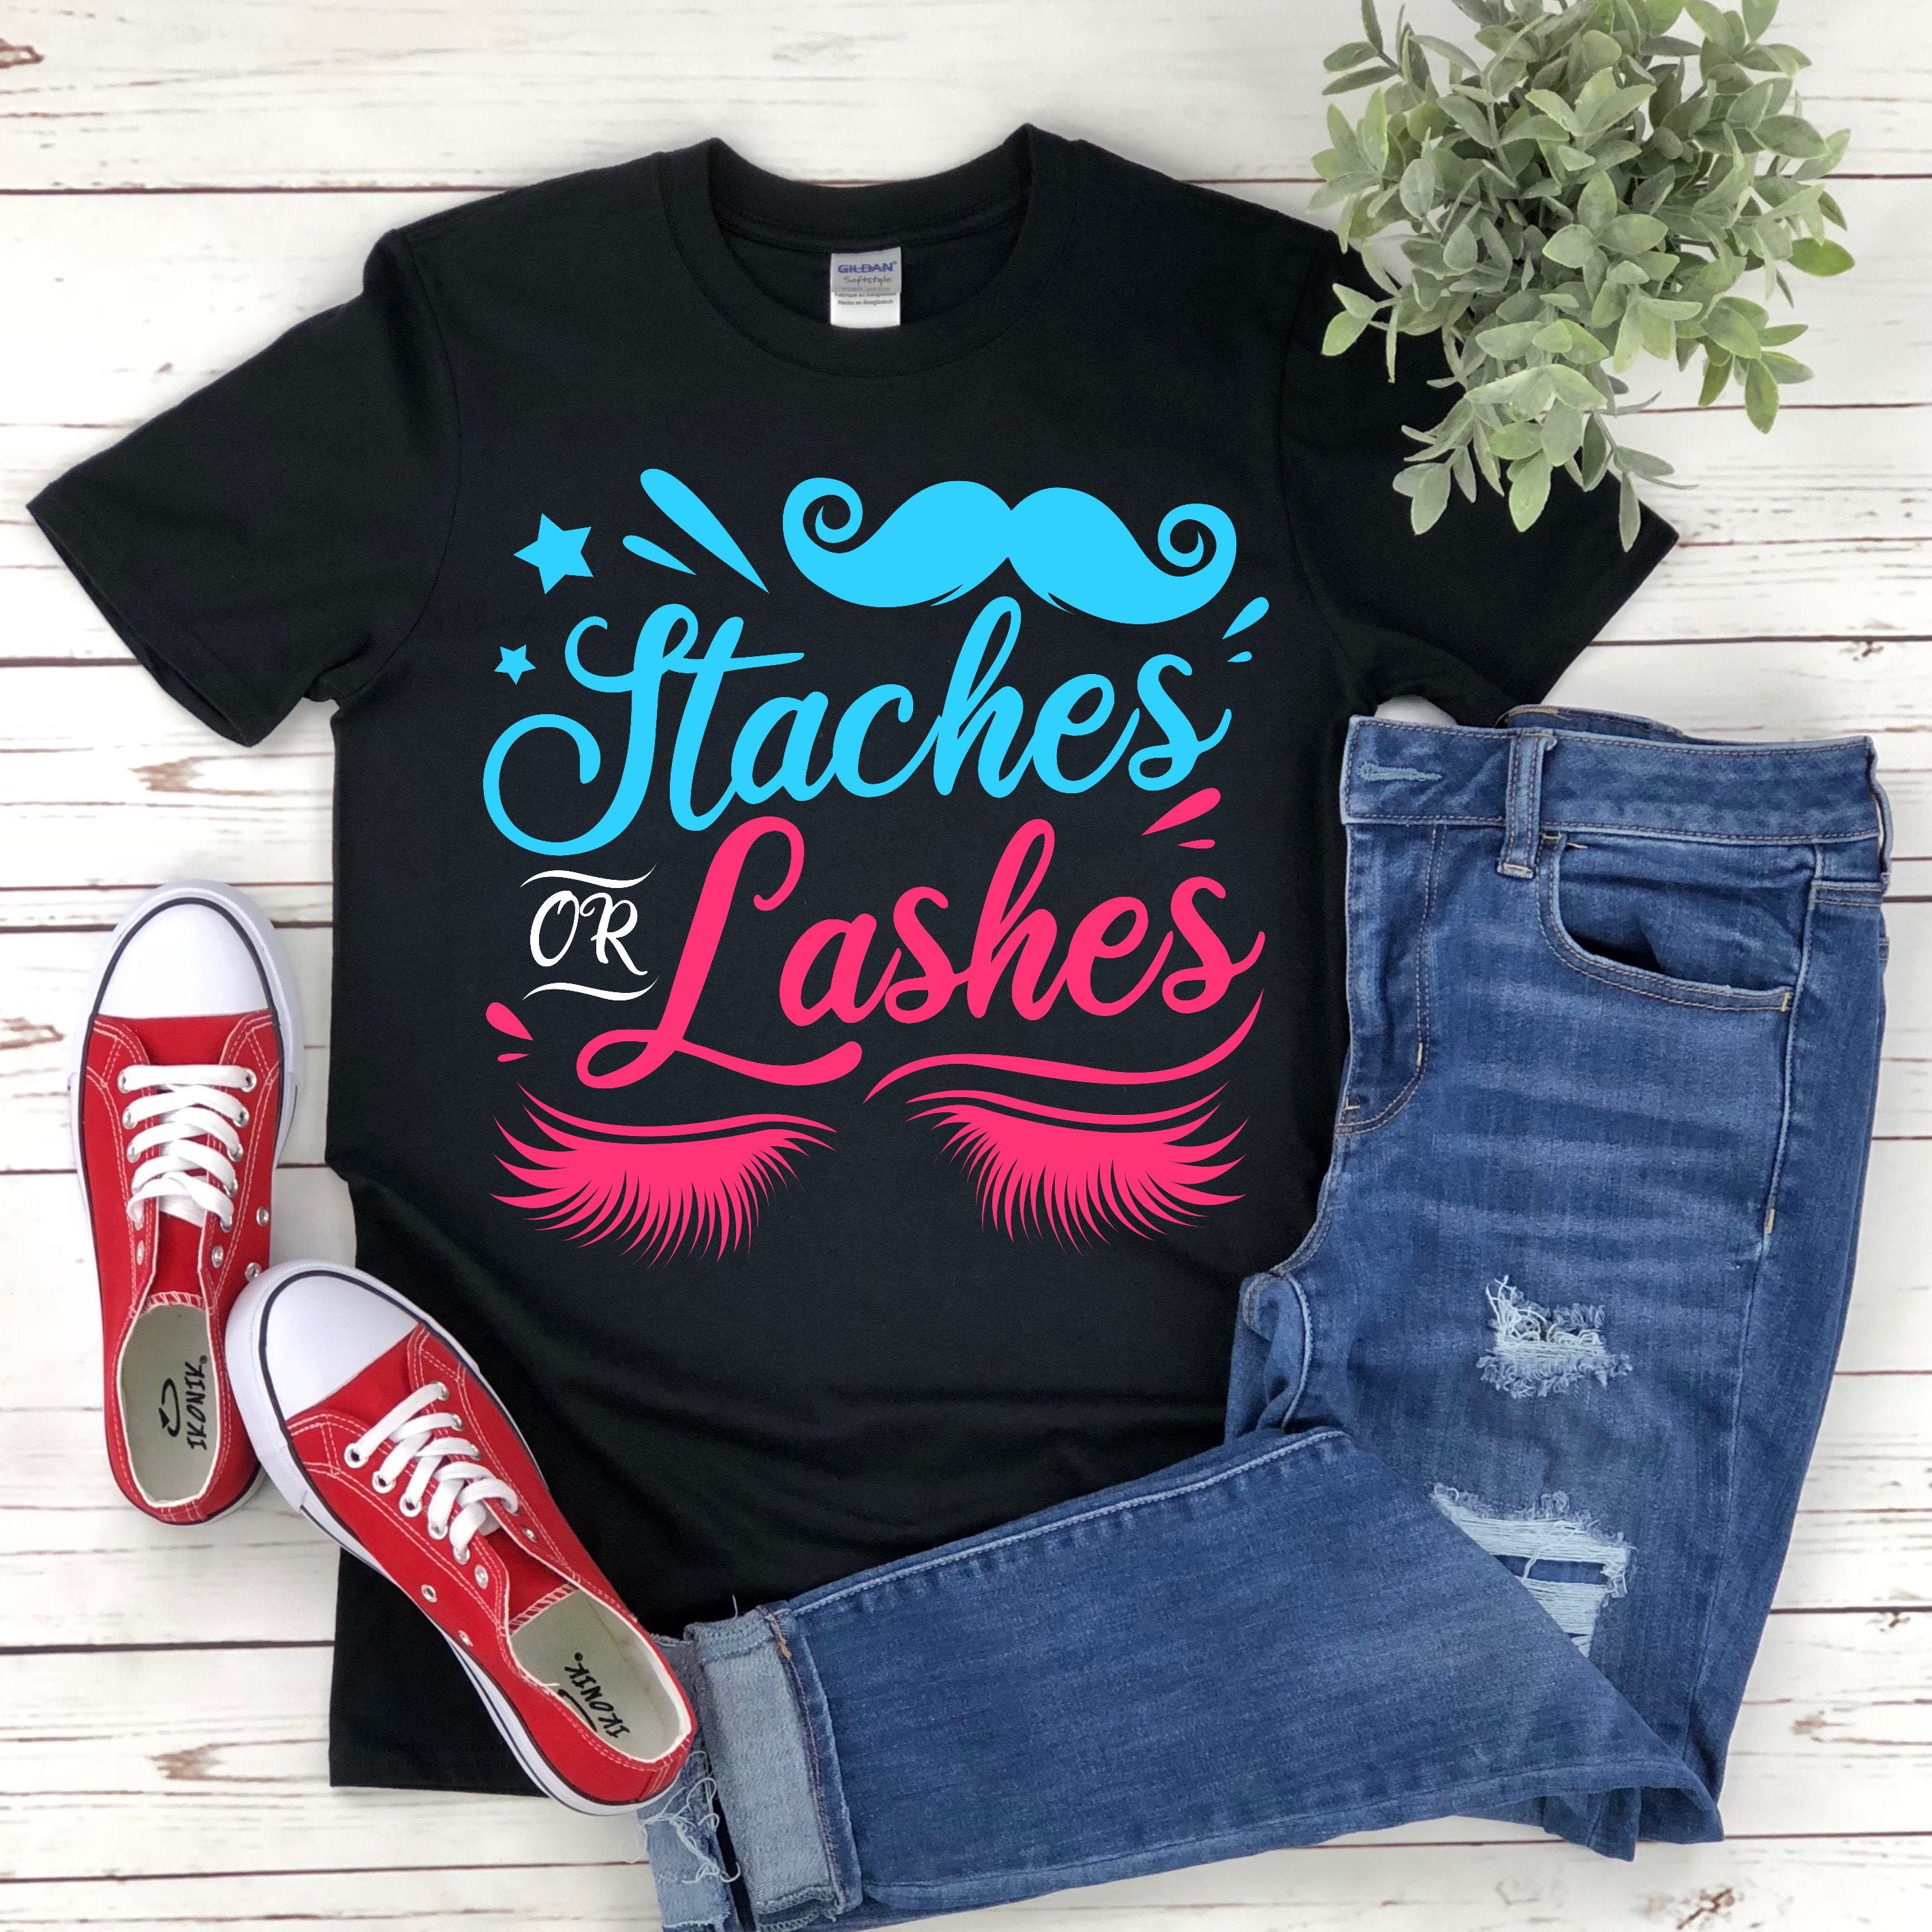 STACHES OR LASHES, gender reveal shirts, pregnant shirts, new mom gifts, baby shower gift, baby announcement shirt, funny new dad gifts